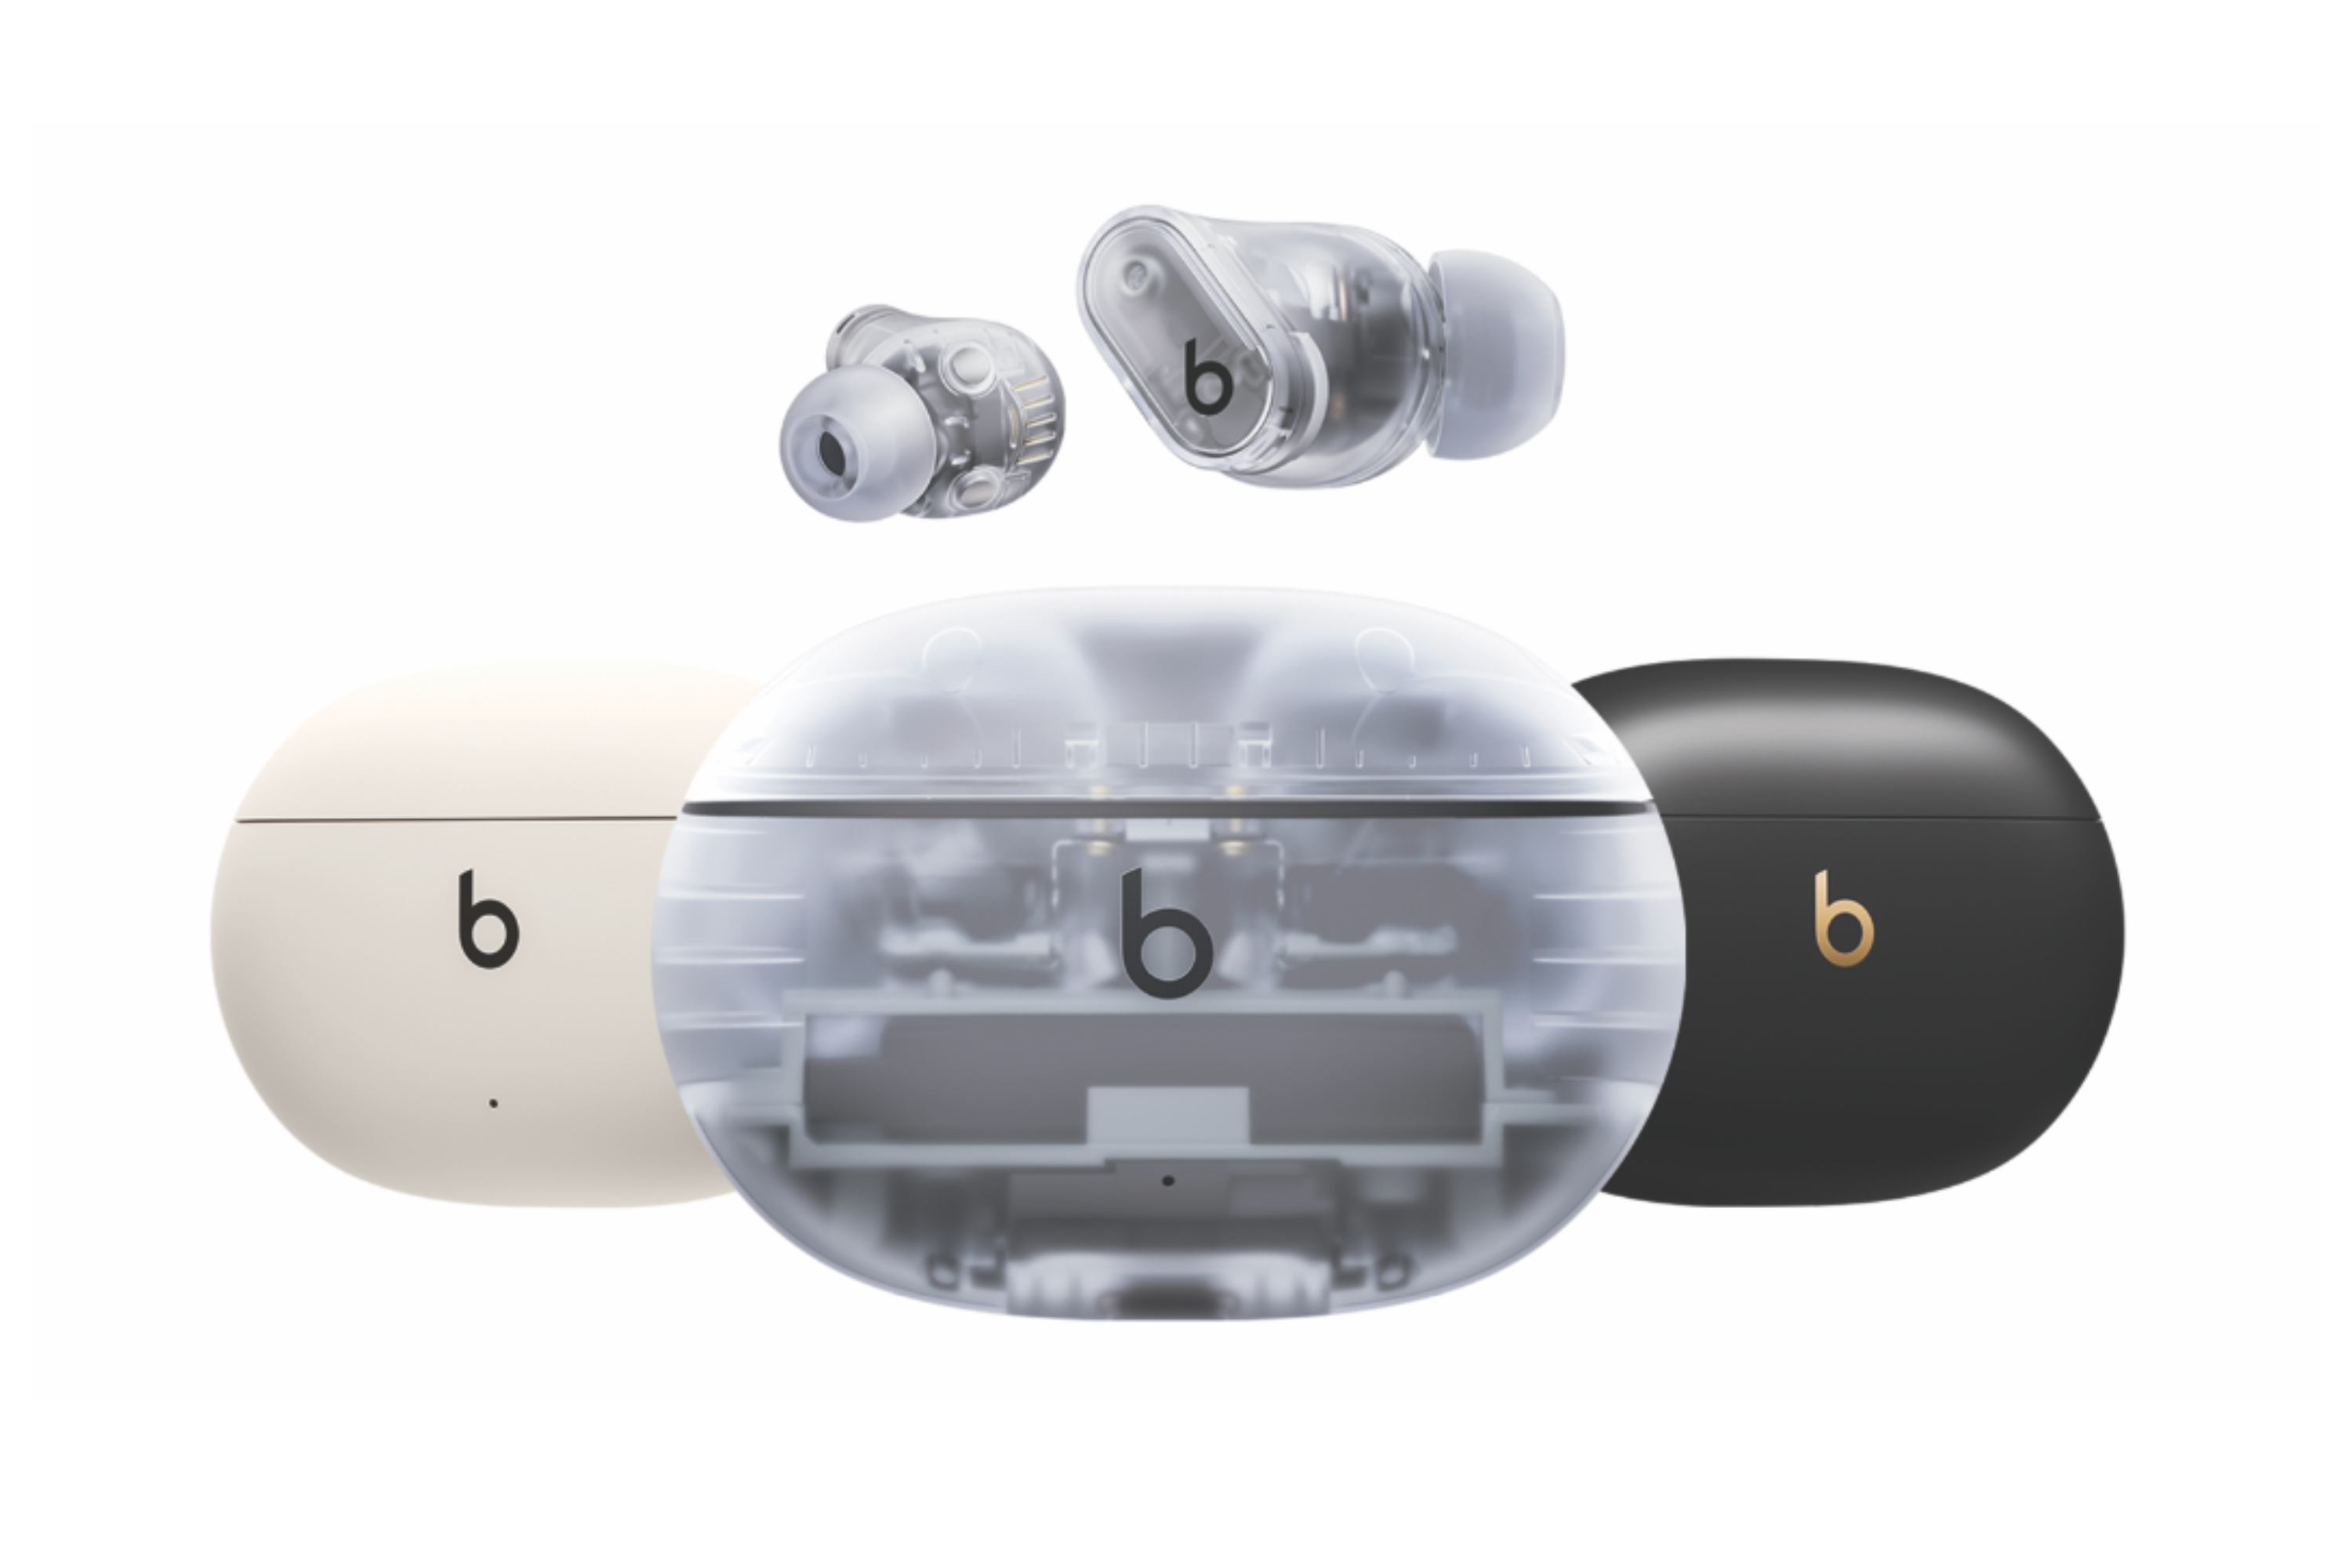 Beats Studio Buds + in three new colors: Black and Gold, Ivory, and Transparent